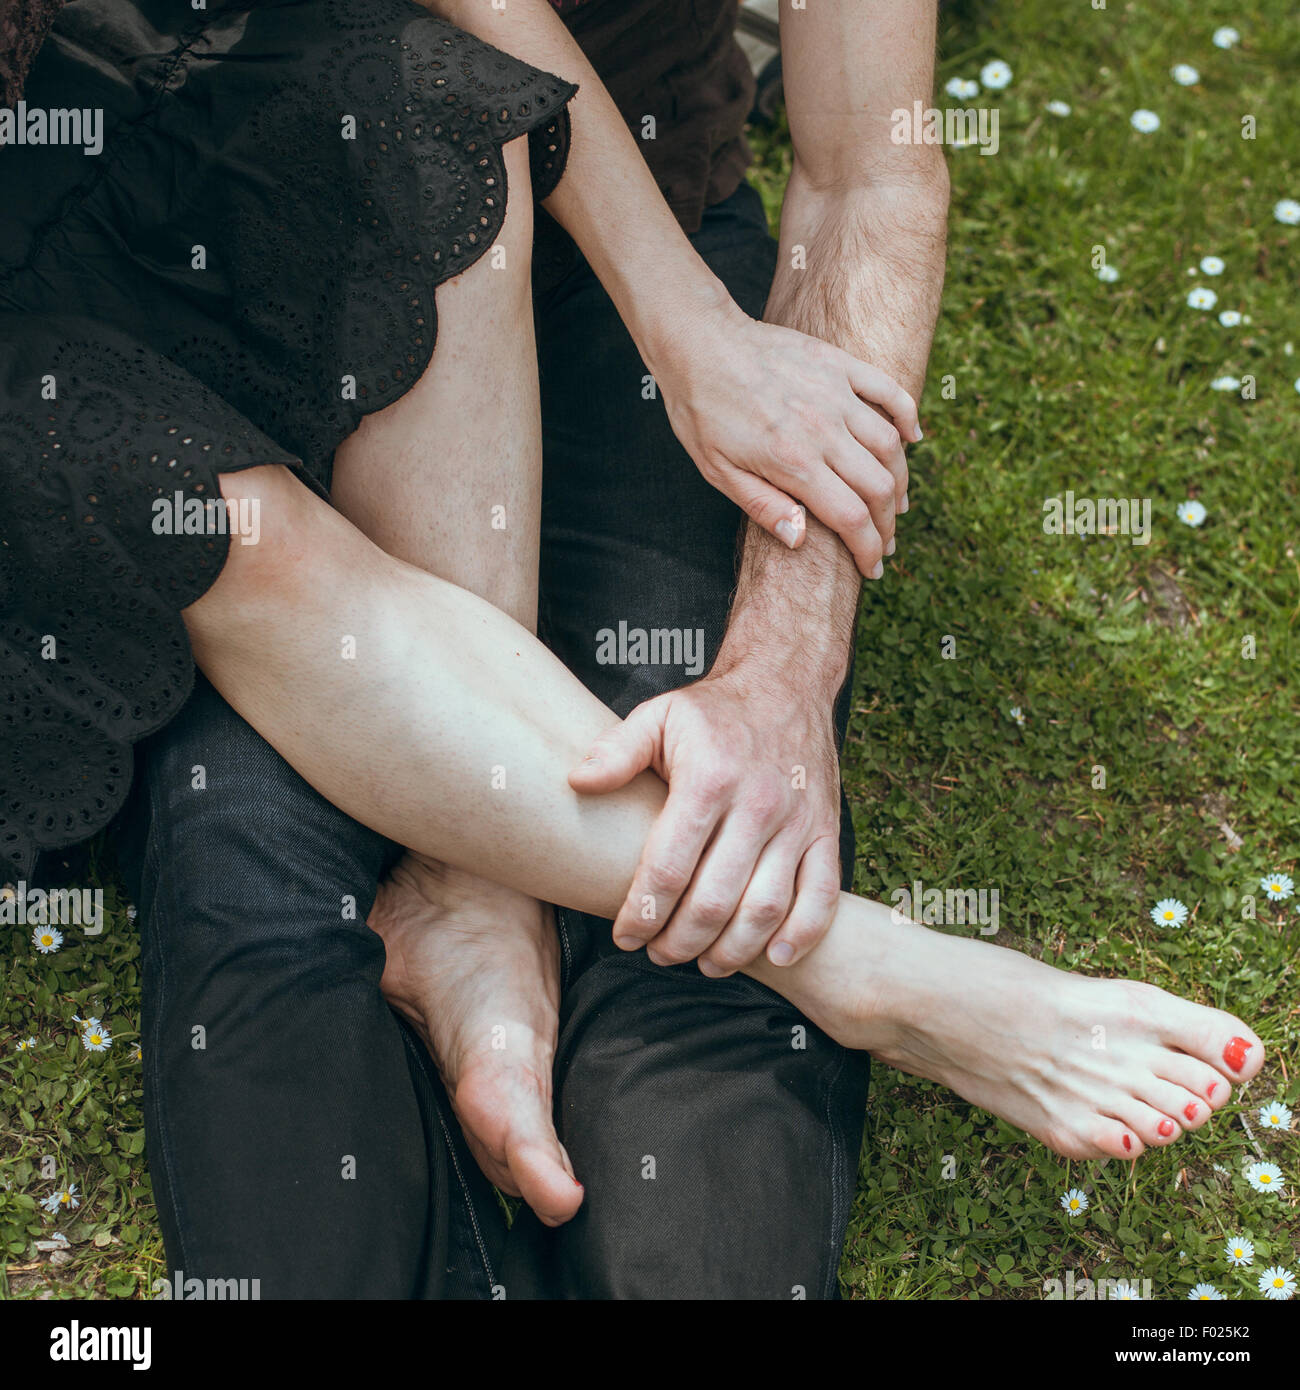 Close up of young man holding a young woman's pieds dans sa main Banque D'Images